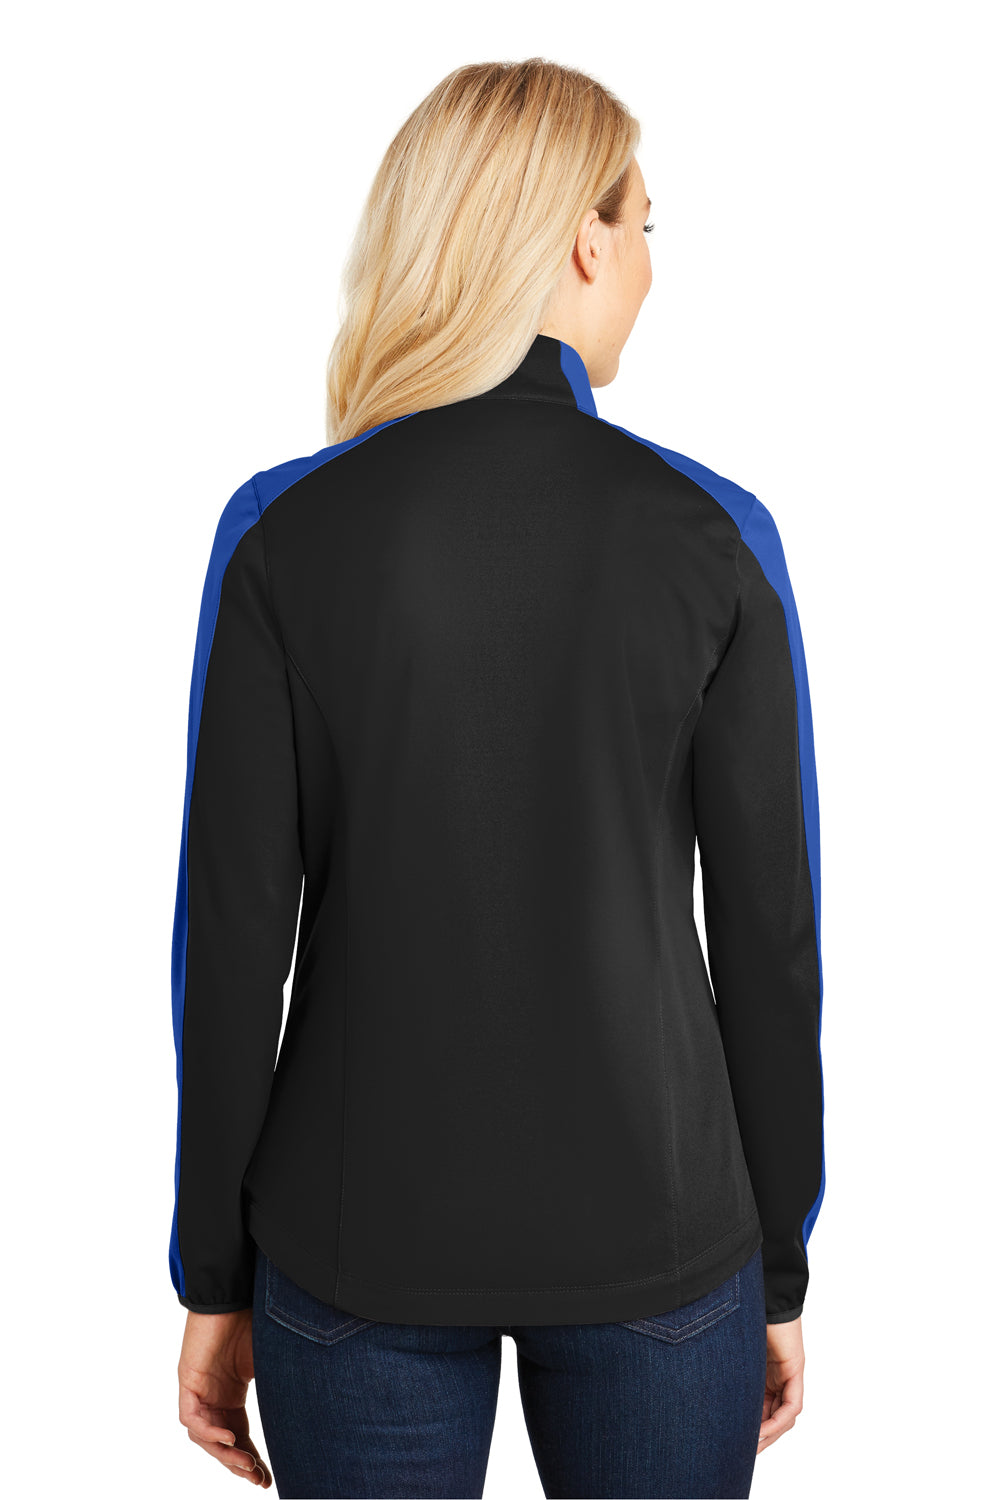 Port Authority L718 Womens Active Wind & Water Resistant Full Zip Jacket Black/Royal Blue Back